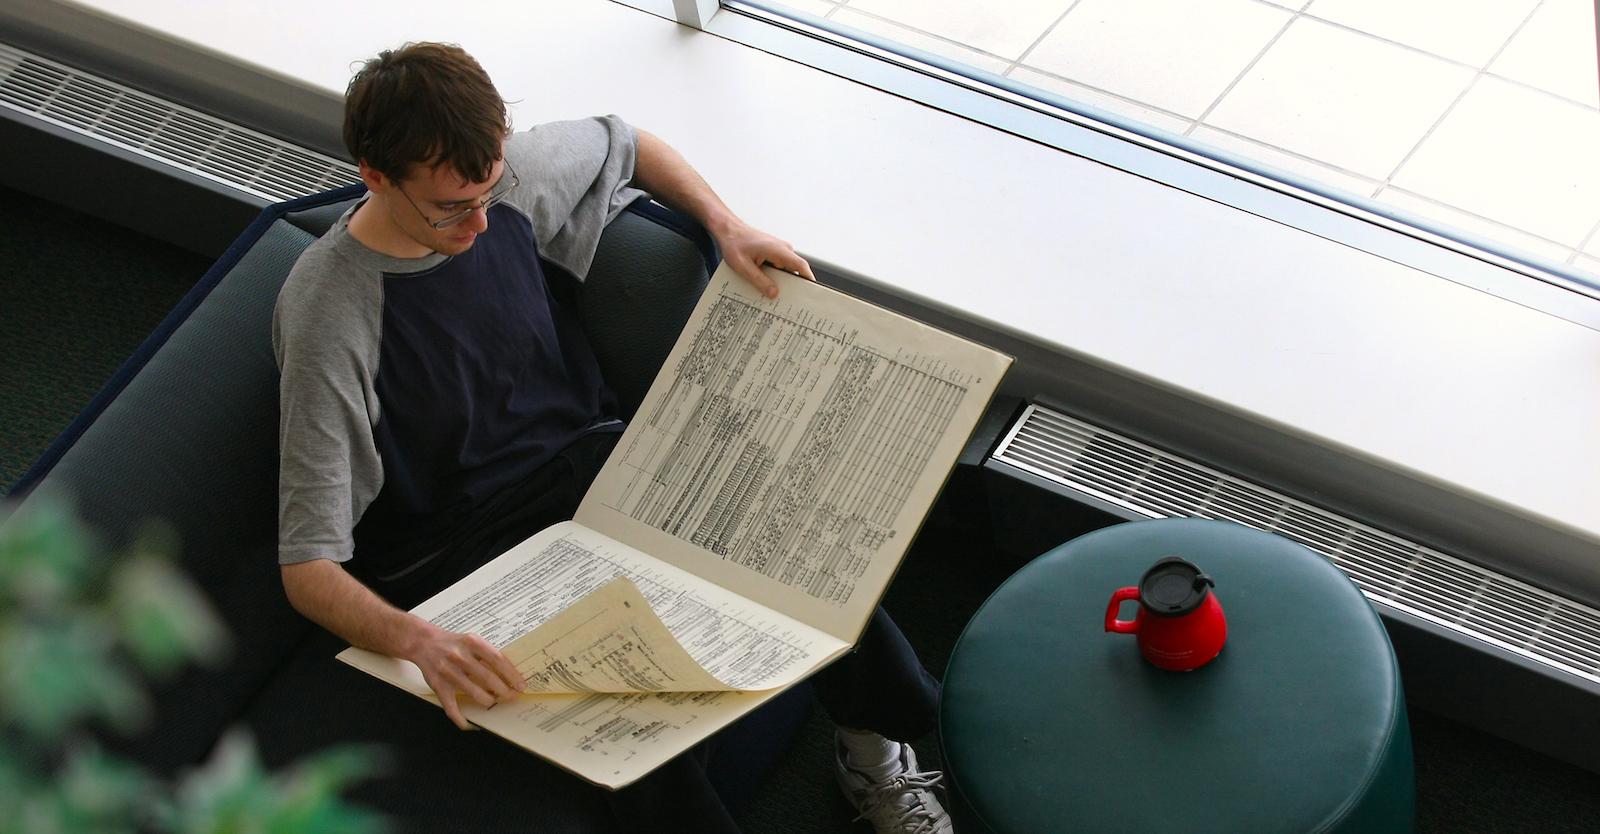 A student reviews a large book while comfortably seated. A travel mug sits on a small table.